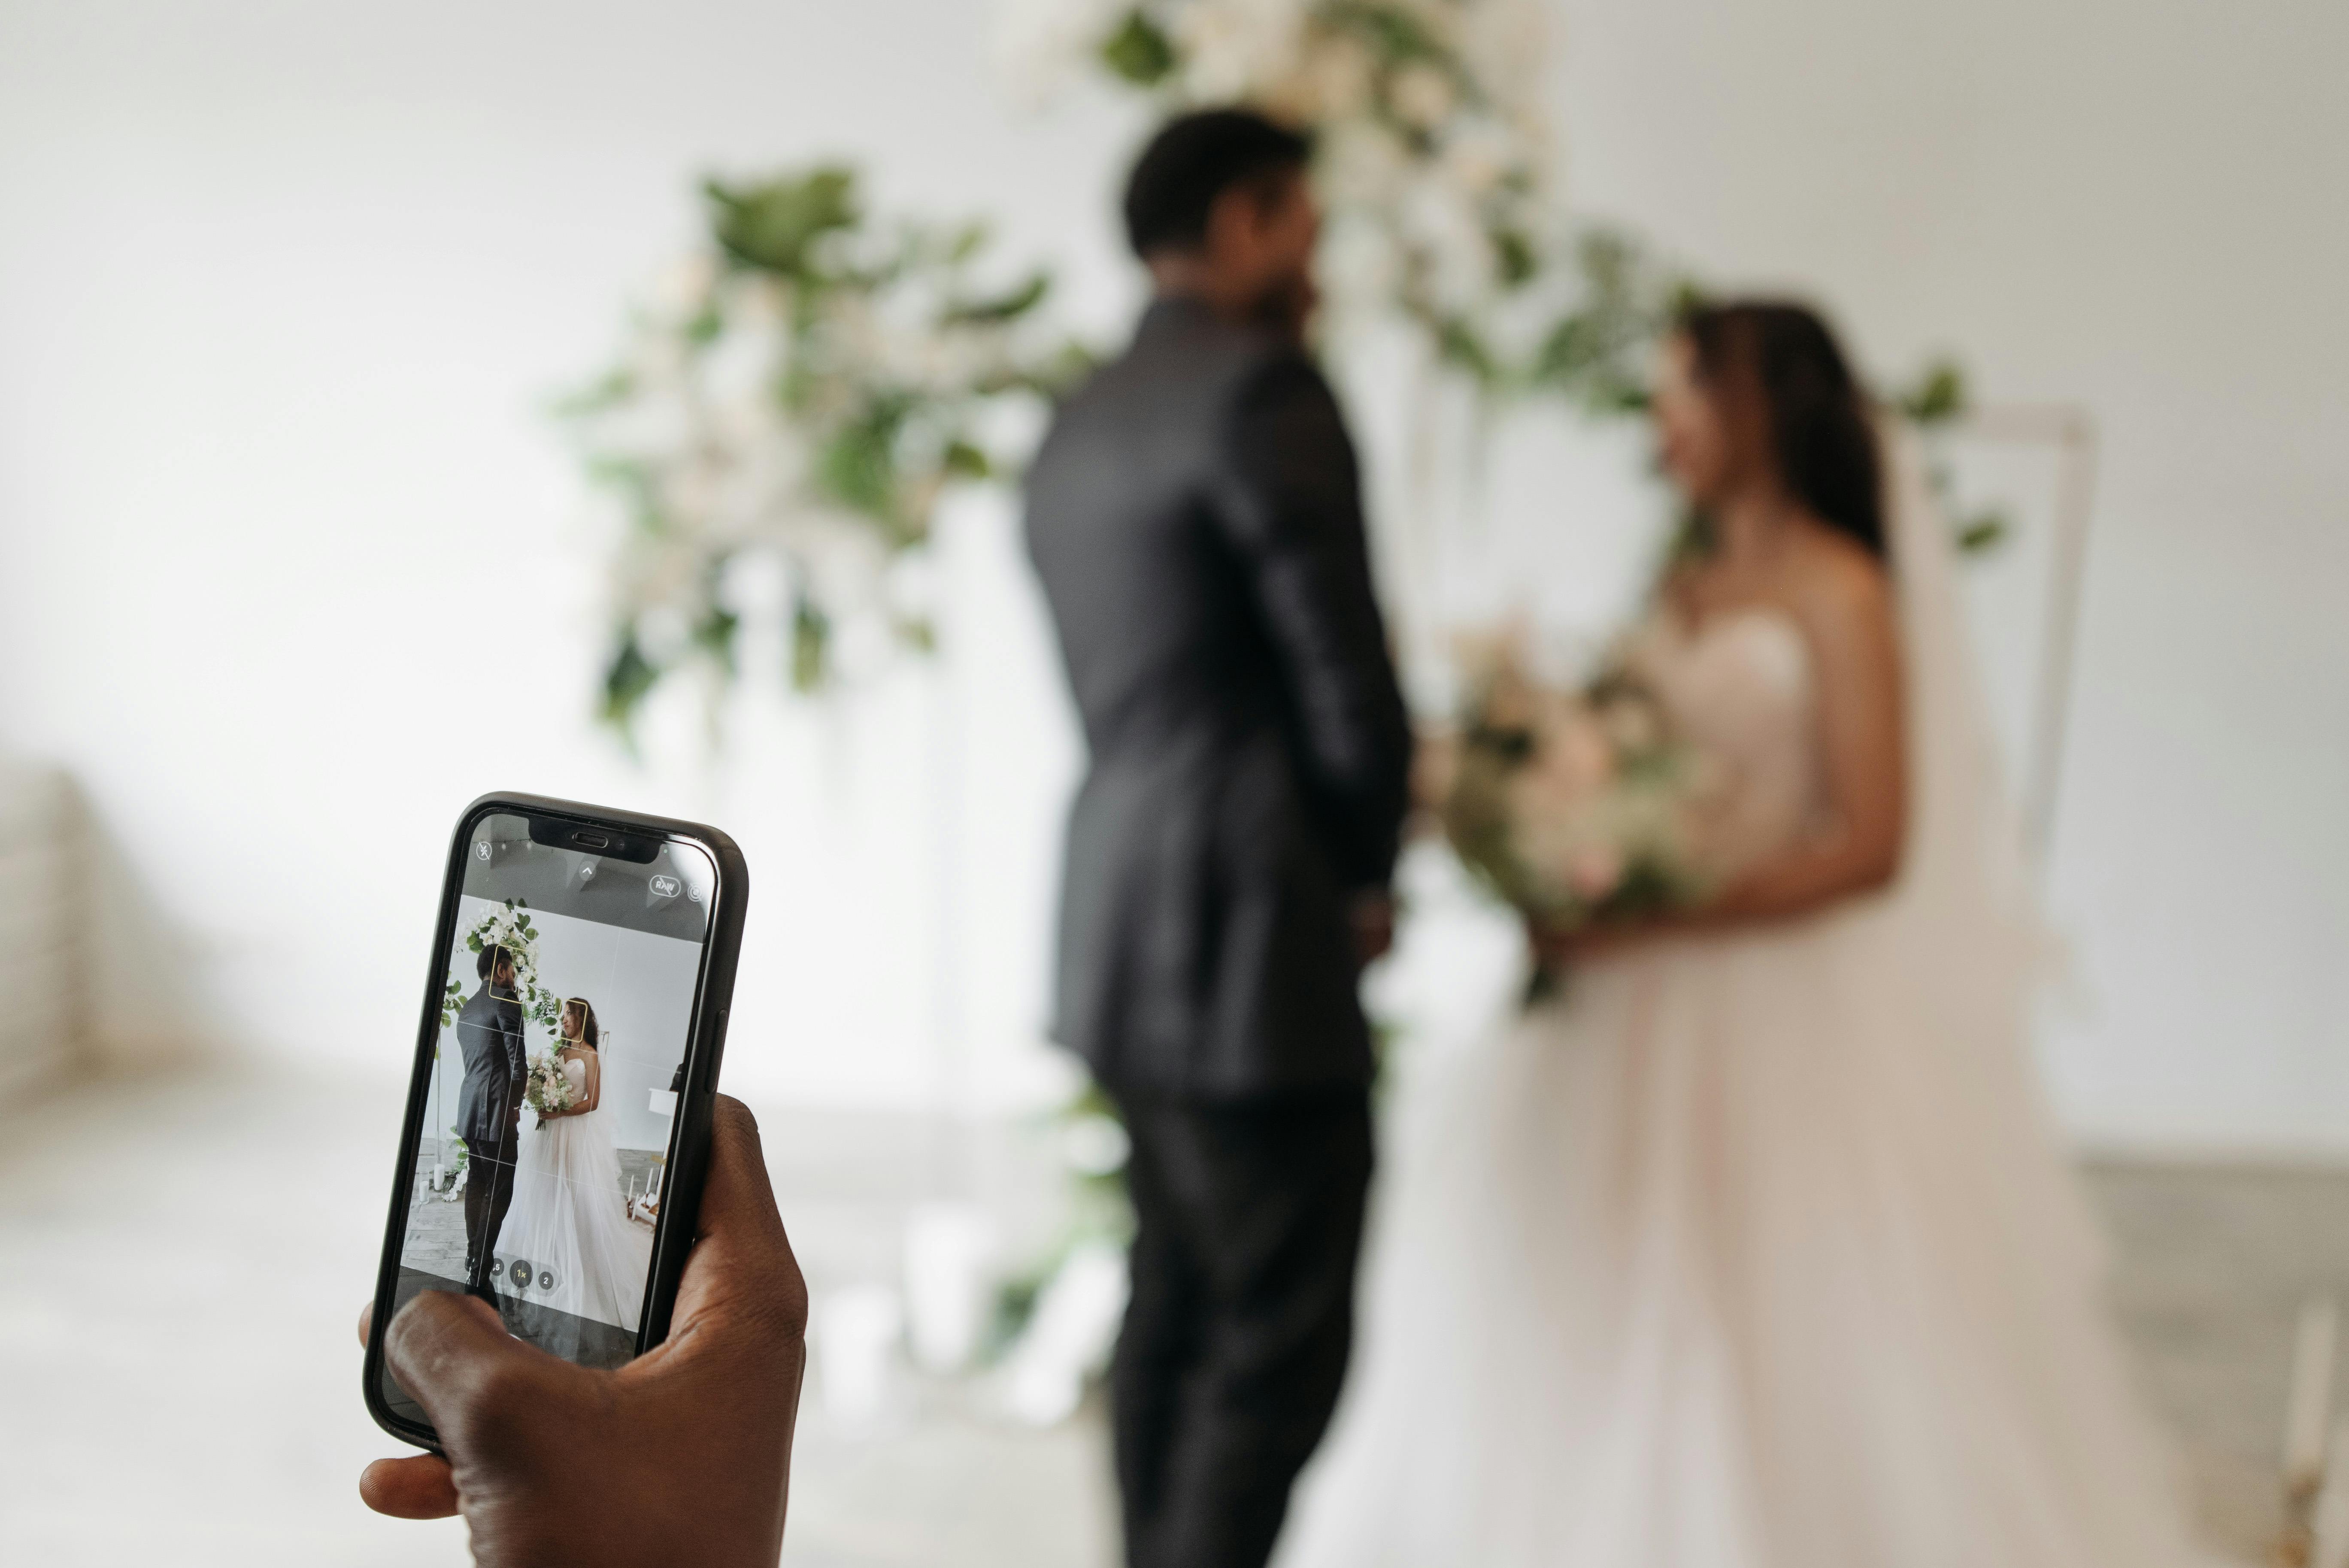 Someone recording a newlywed couple on their phone | Source: Pexels